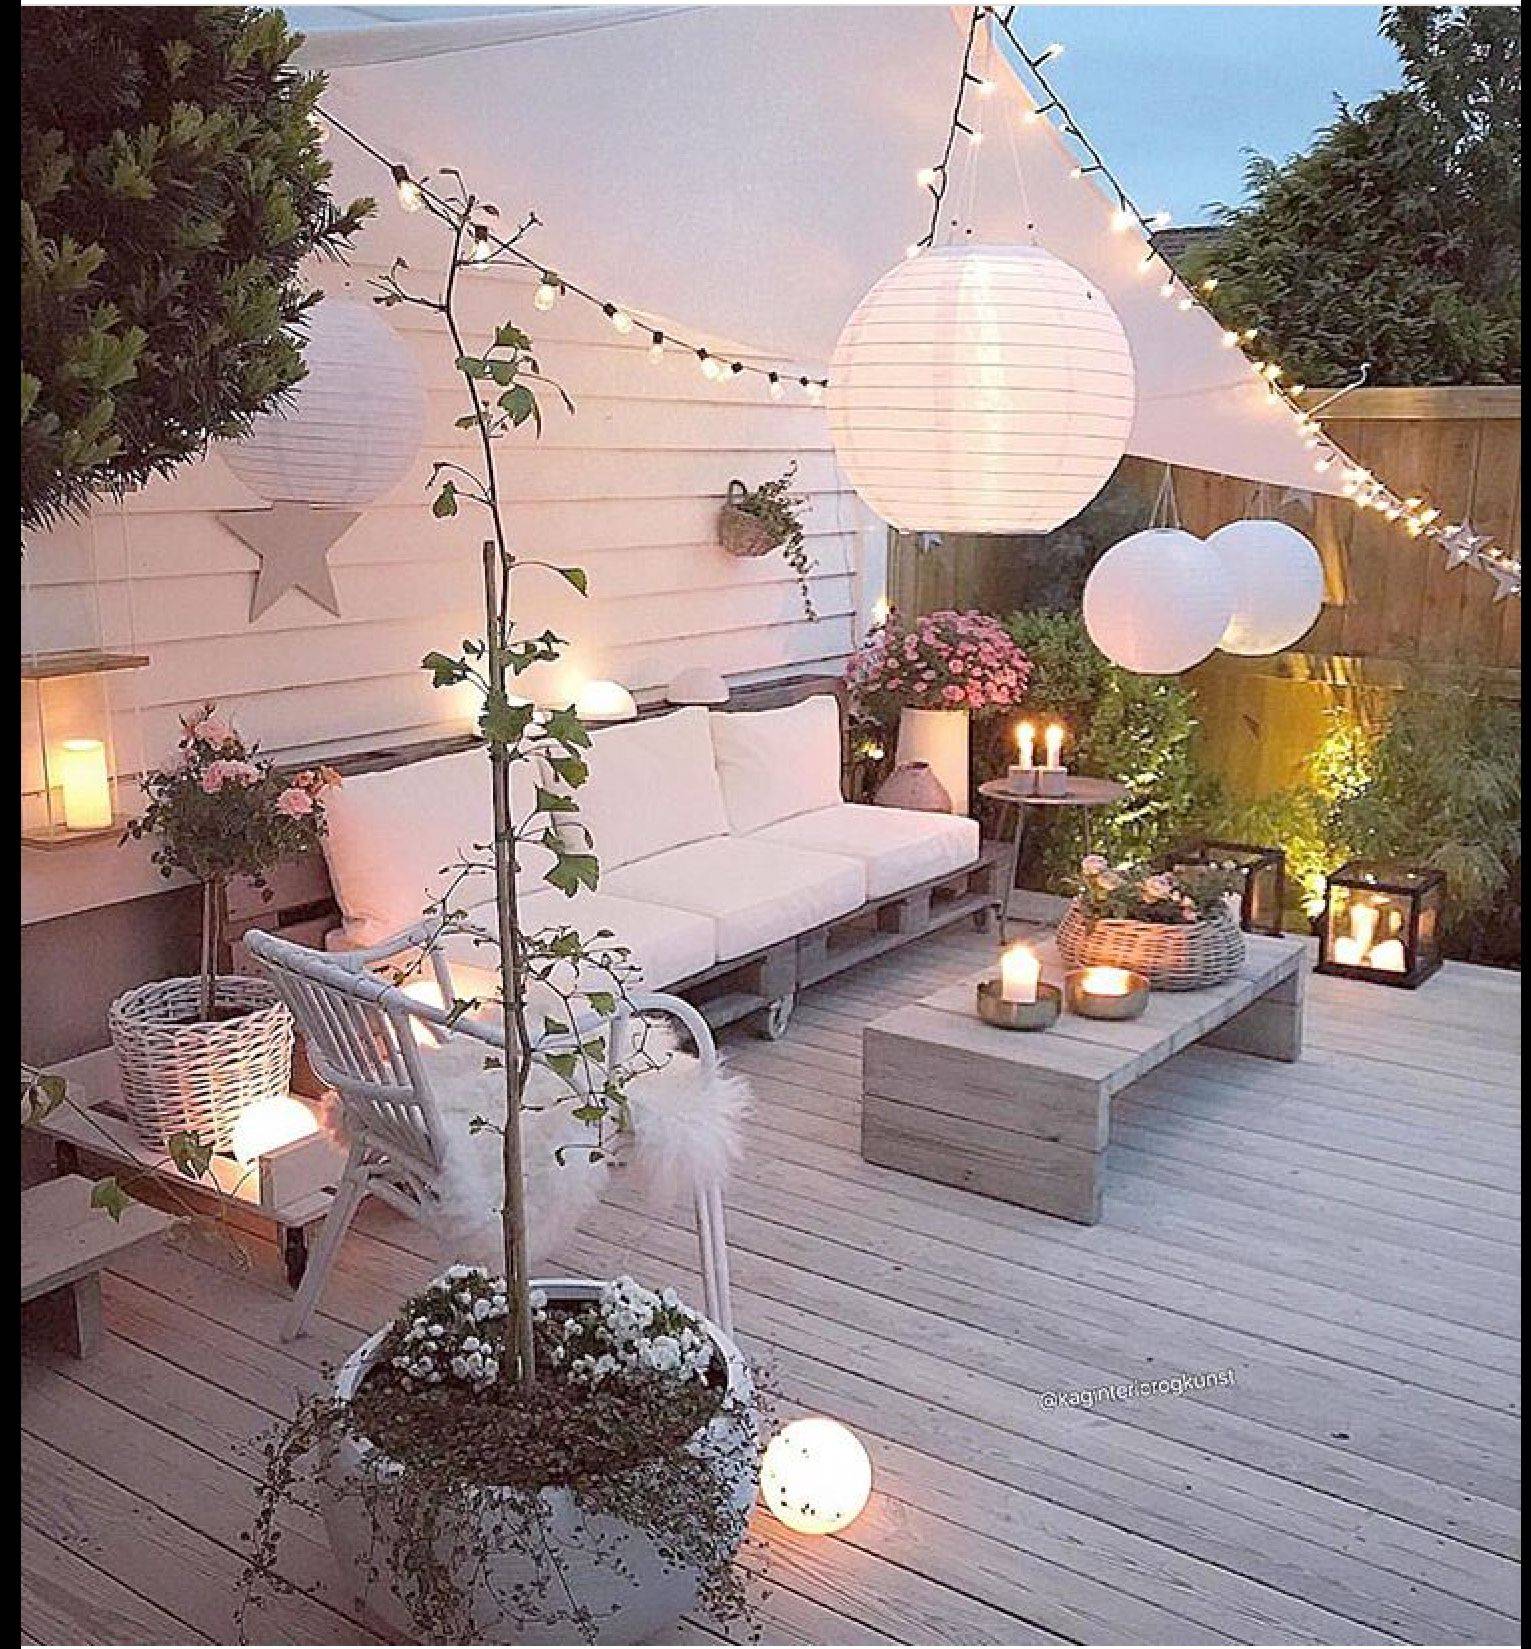 Awesome Roof Garden Design Ideas